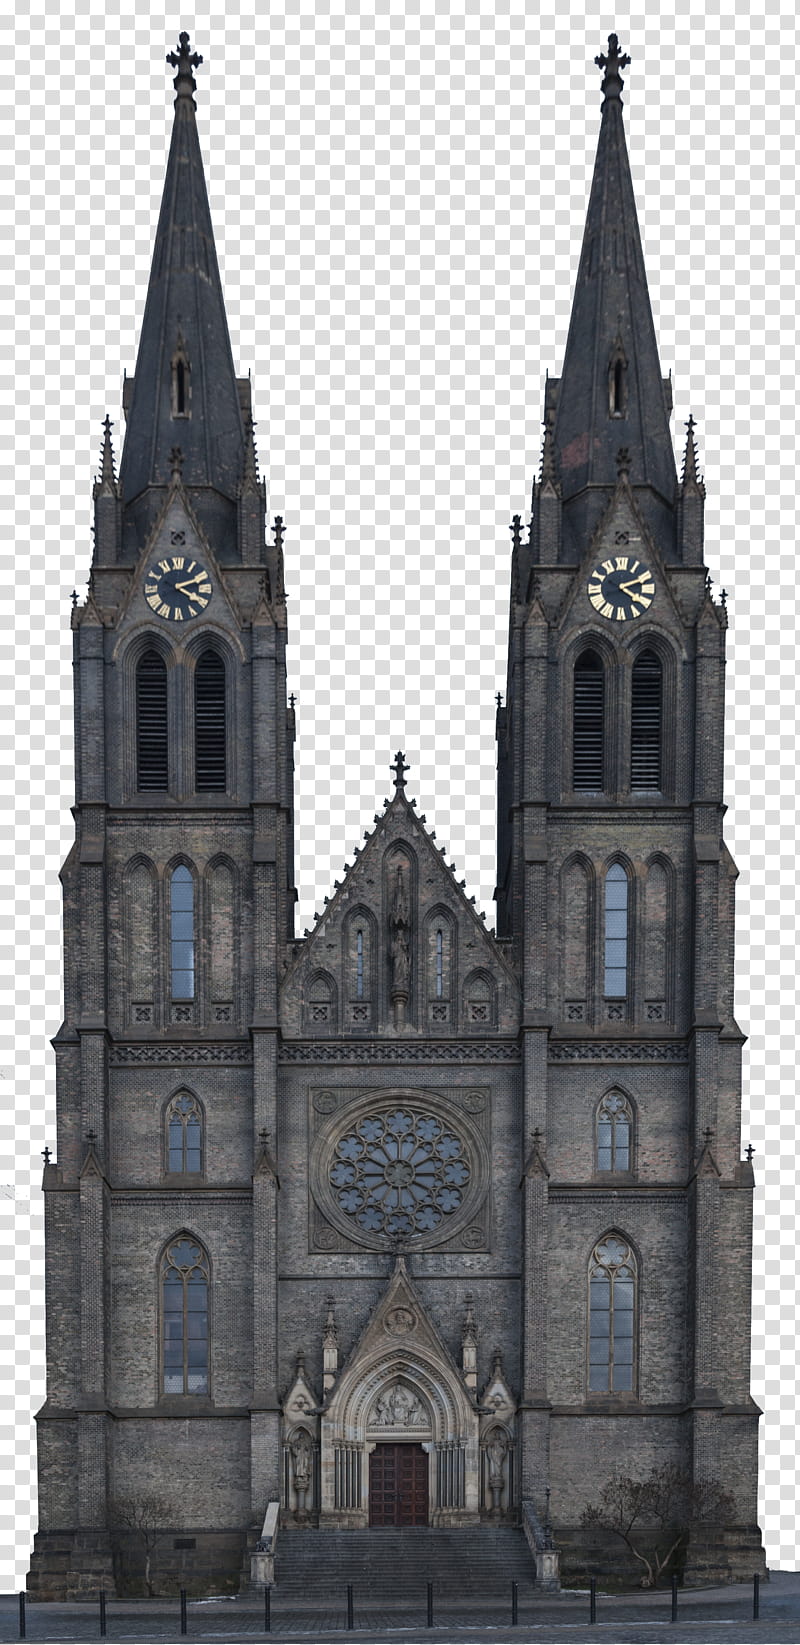 Cathedral, gray concrete cathedral illustration transparent background PNG clipart